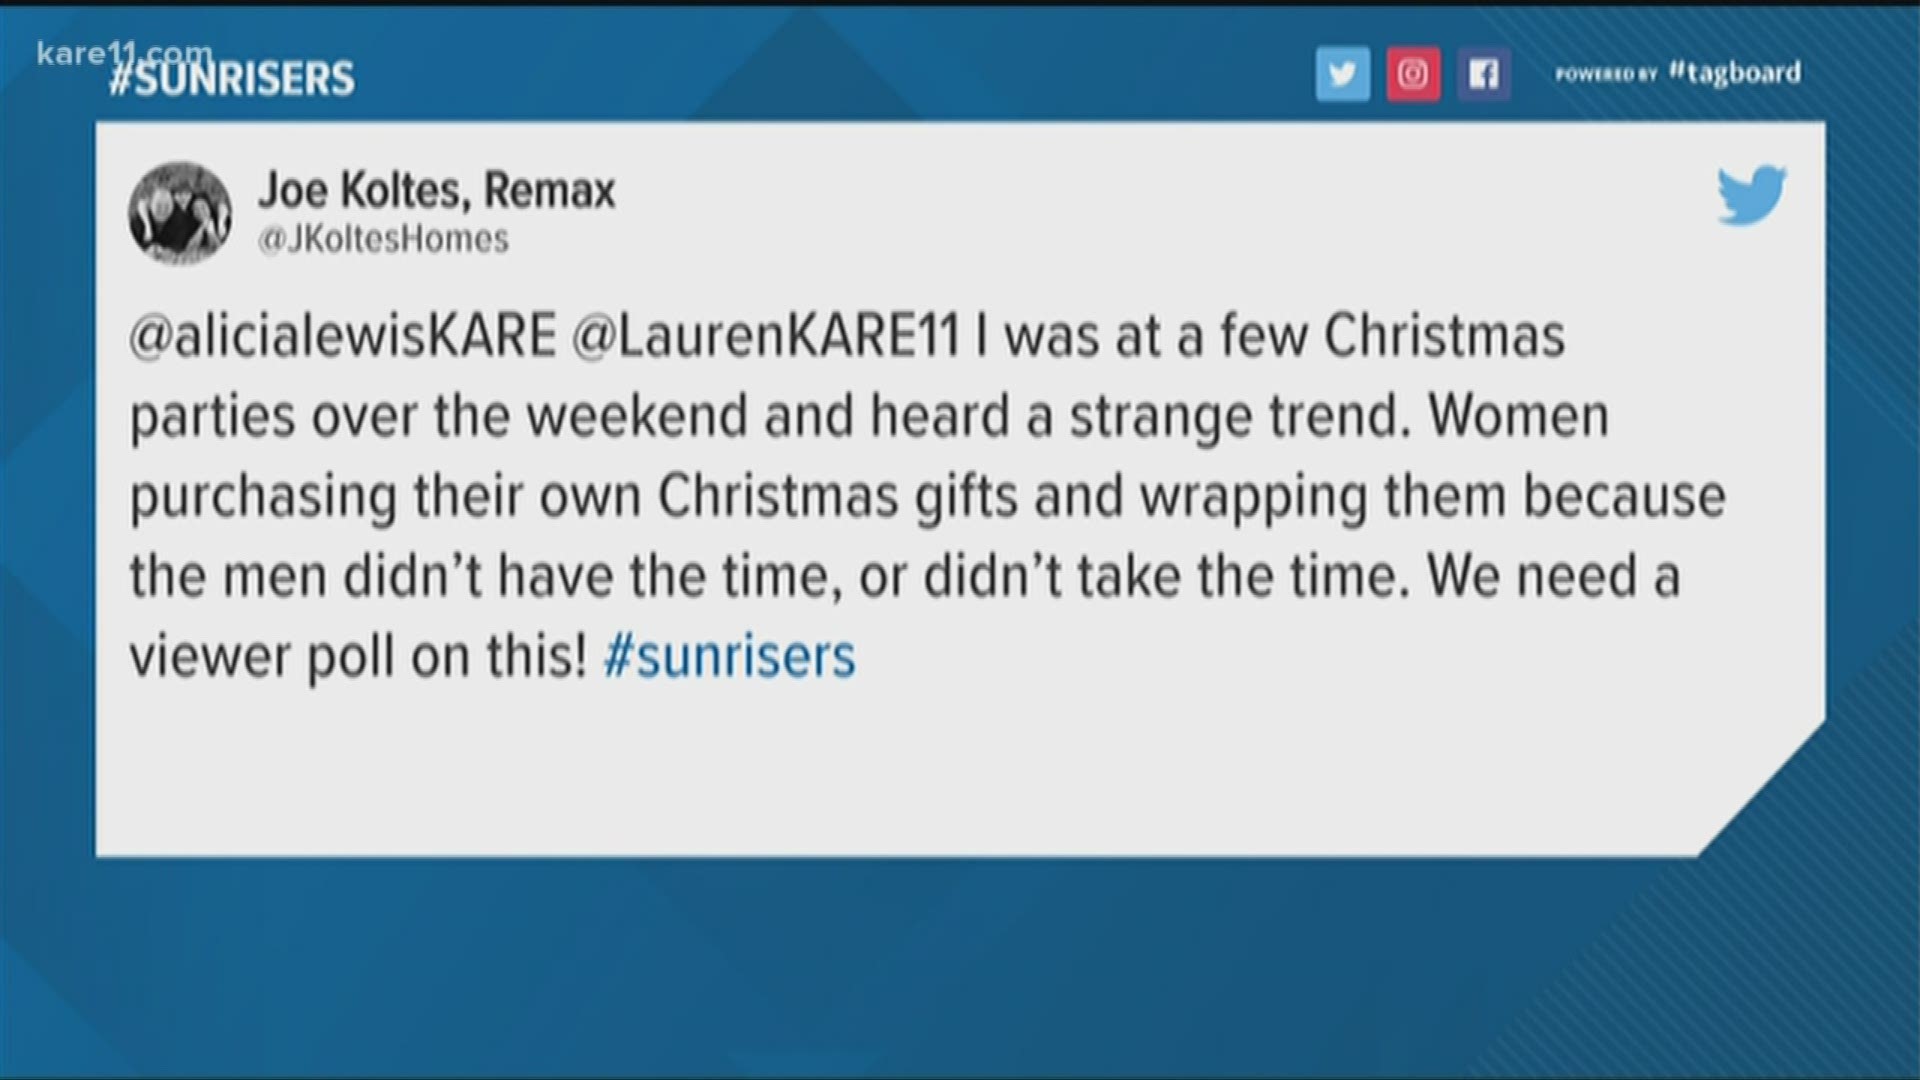 One of our Sunrisers, Joe, tweeted at us over the weekend asking if we had heard of this strange "trend": women buying and wrapping their own gifts because their significant others are too busy. What do you think about this?